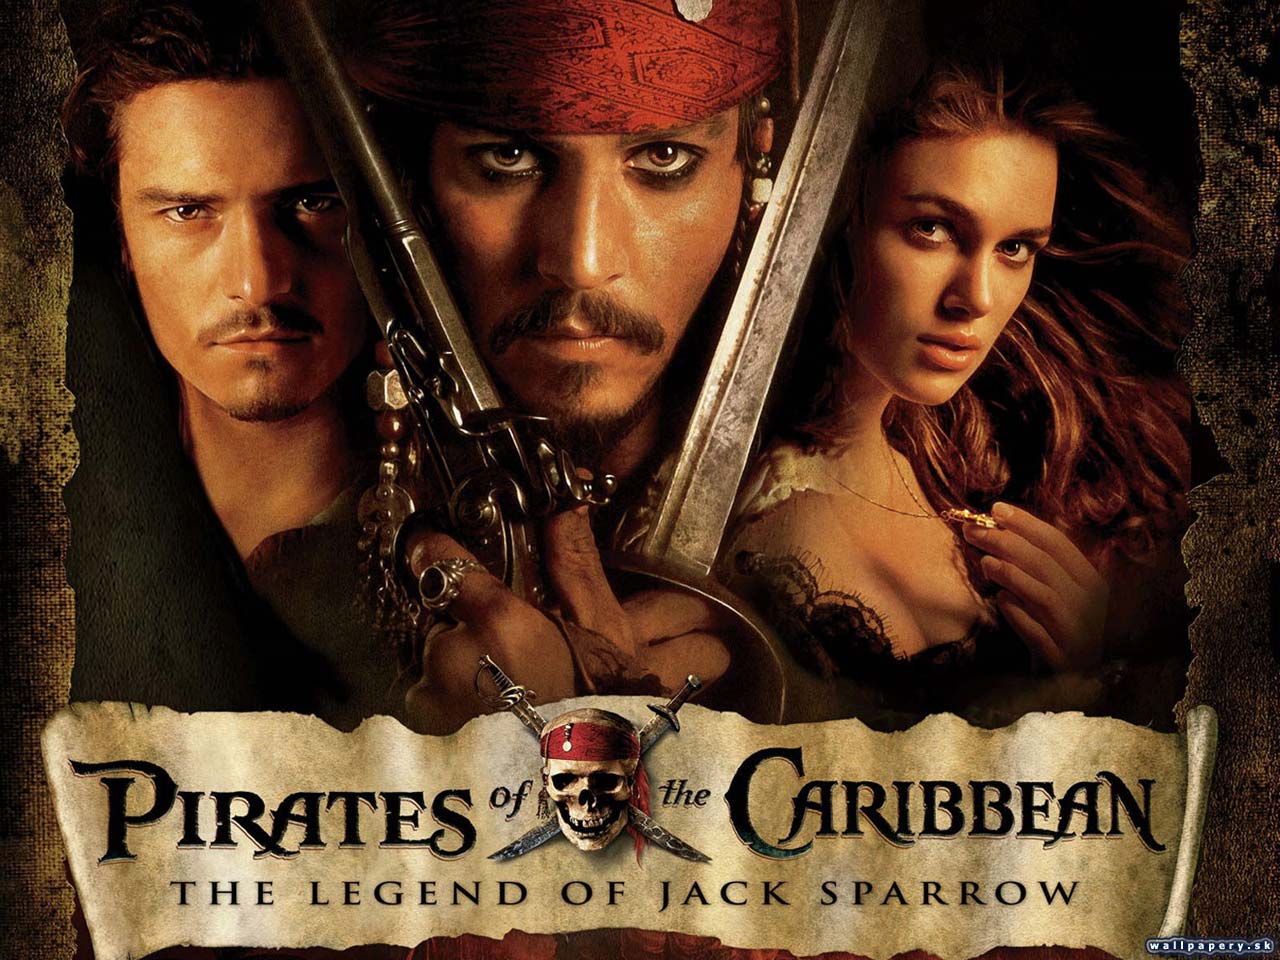 Pirates of the Caribbean: The Legend of Jack Sparrow - wallpaper 1